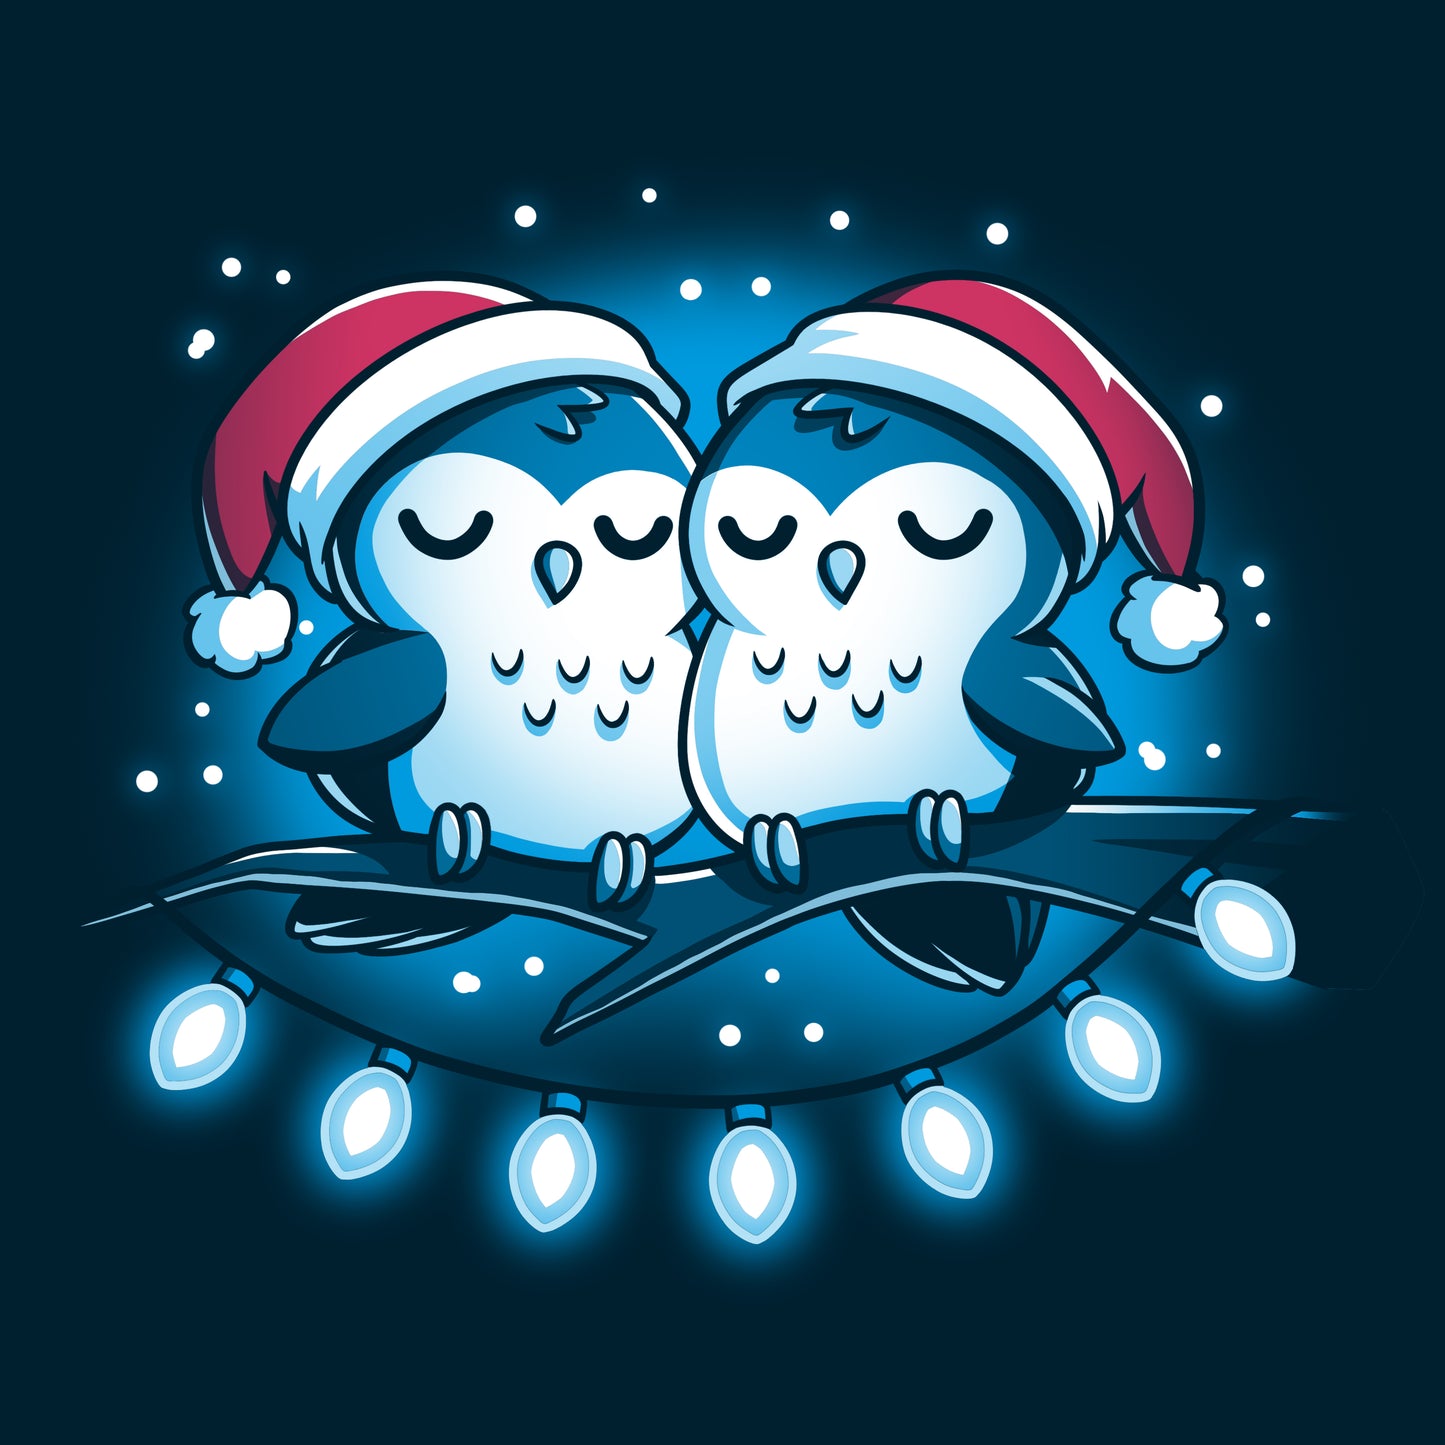 Two owls in Santa hats sitting on a branch, bringing Long Winter's Nap comfort on a TeeTurtle T-shirt.